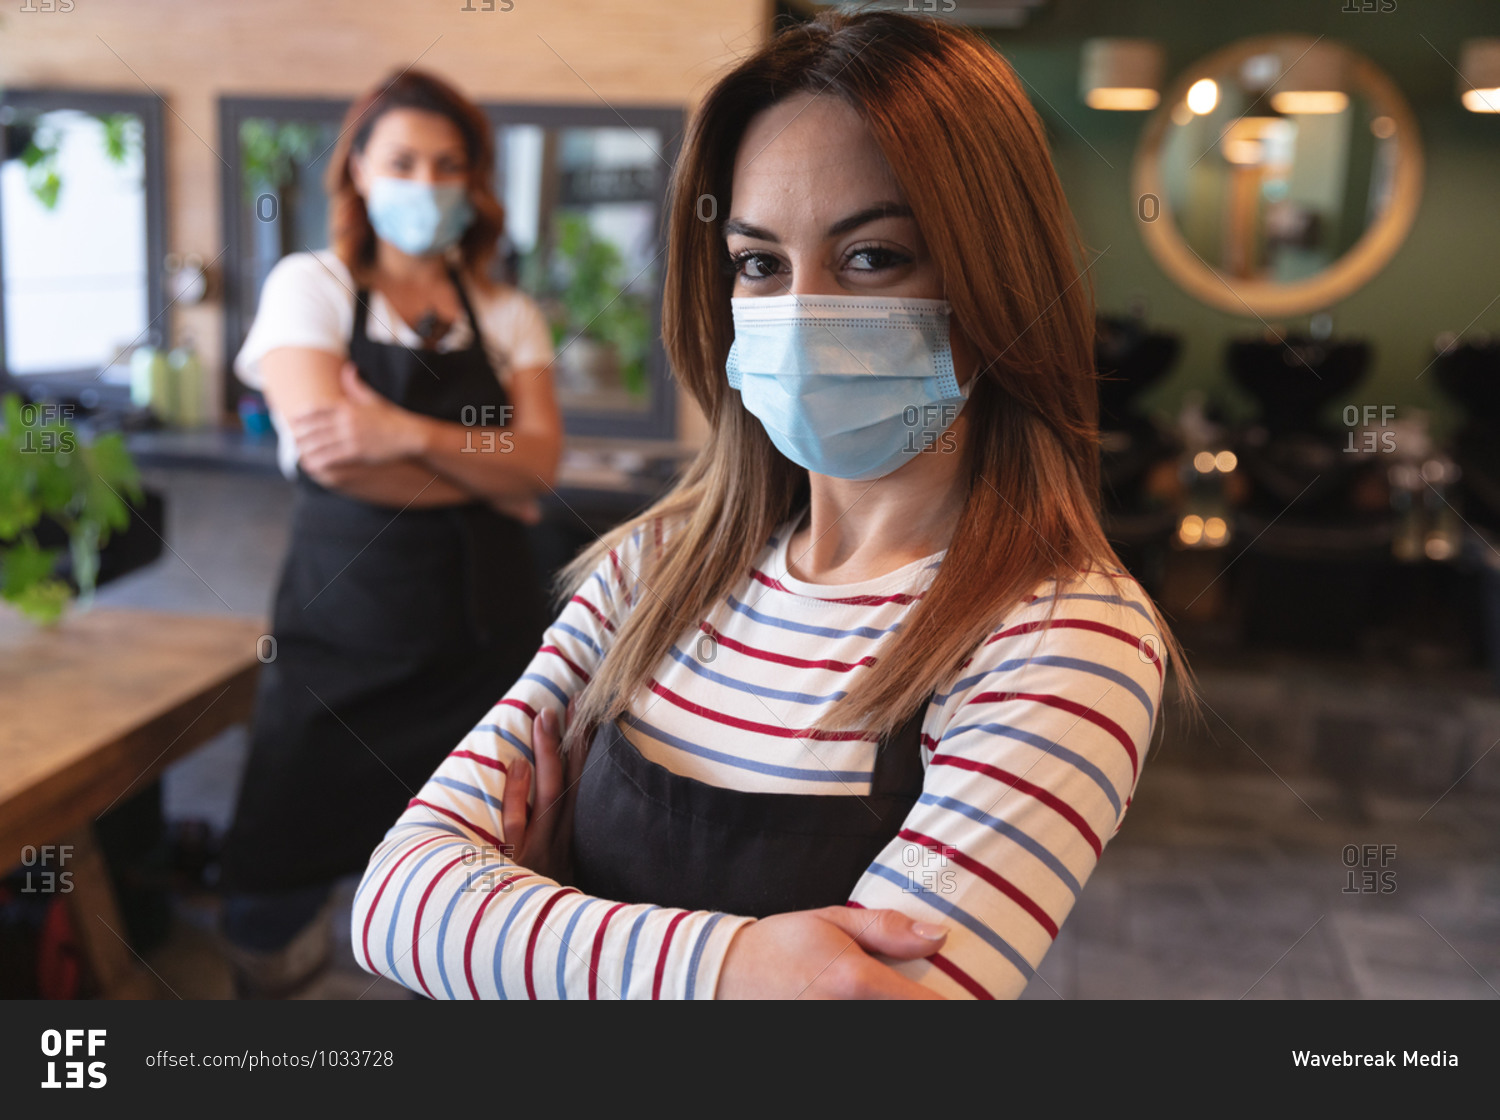 Portrait of Caucasian female hairdresser working in hair salon wearing face mask, posing for a picture with her arms crossed. Health and hygiene in workplace during Coronavirus Covid 19 pandemic.